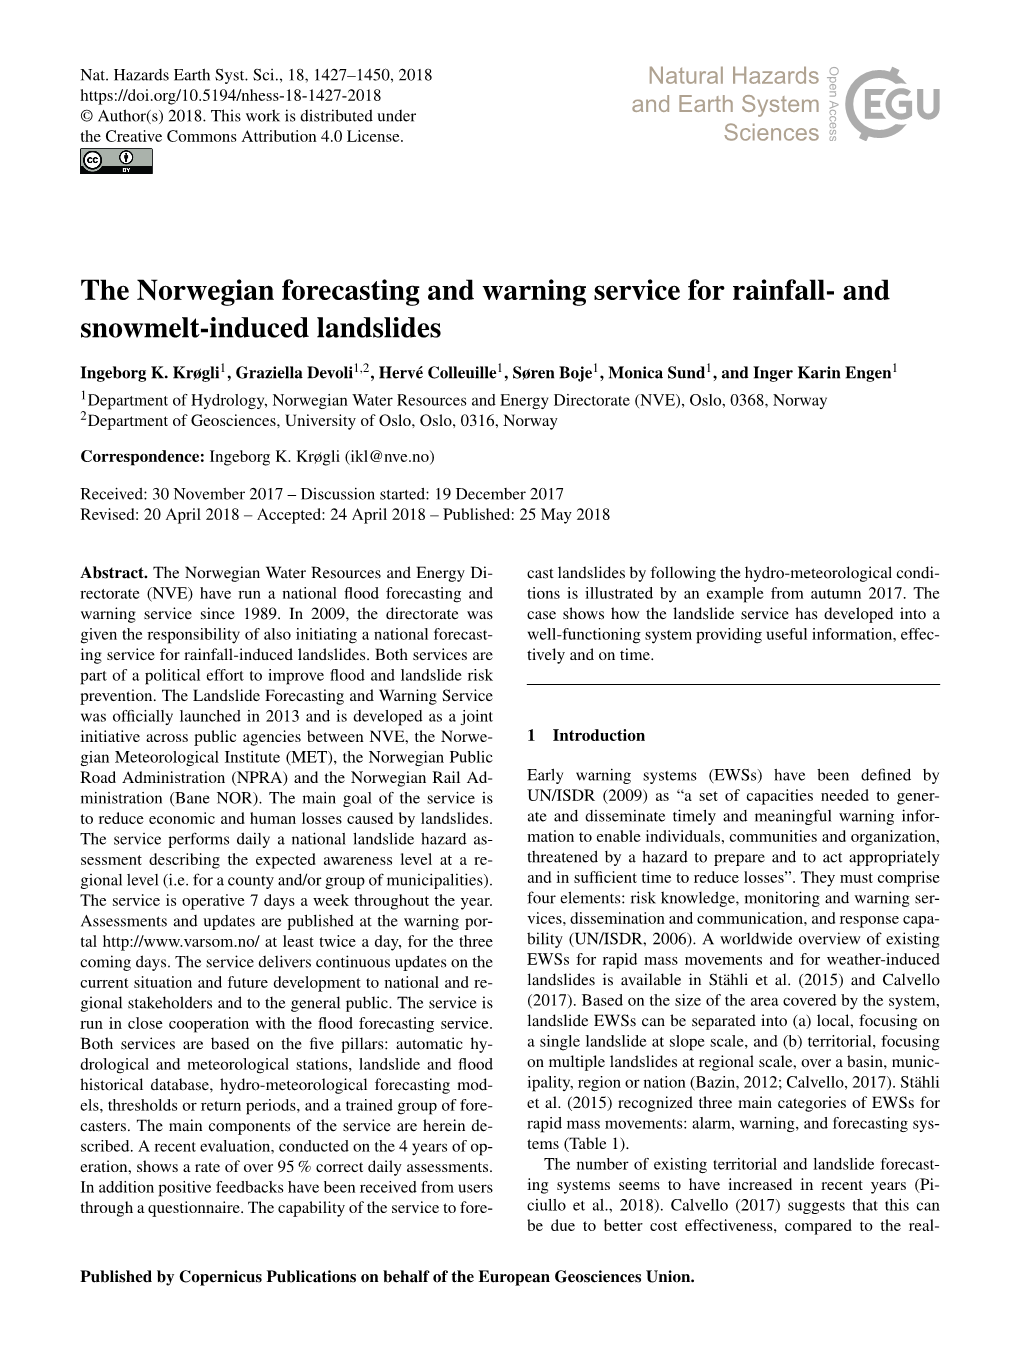 The Norwegian Forecasting and Warning Service for Rainfall- and Snowmelt-Induced Landslides